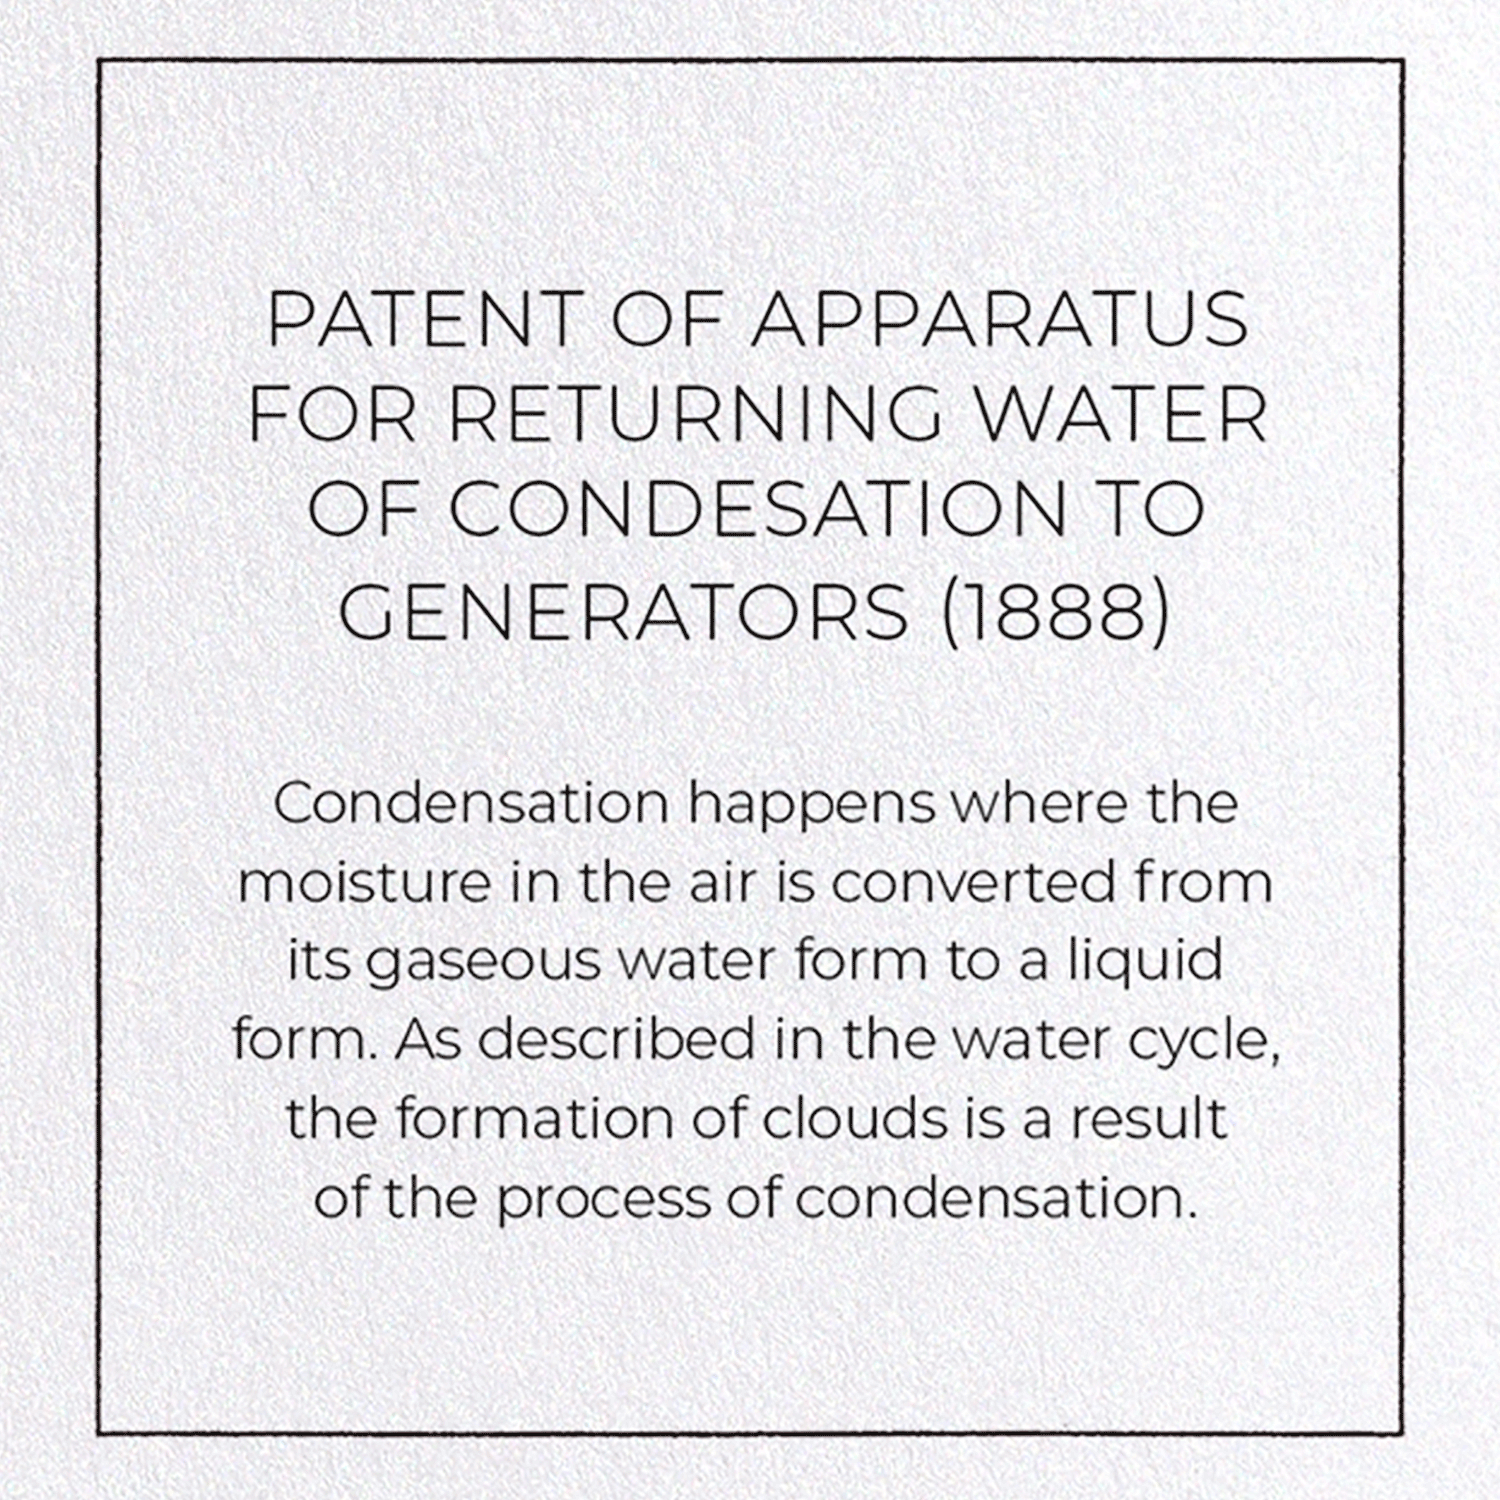 PATENT OF APPARATUS FOR RETURNING WATER OF CONDENSATION TO GENERATORS (1888)